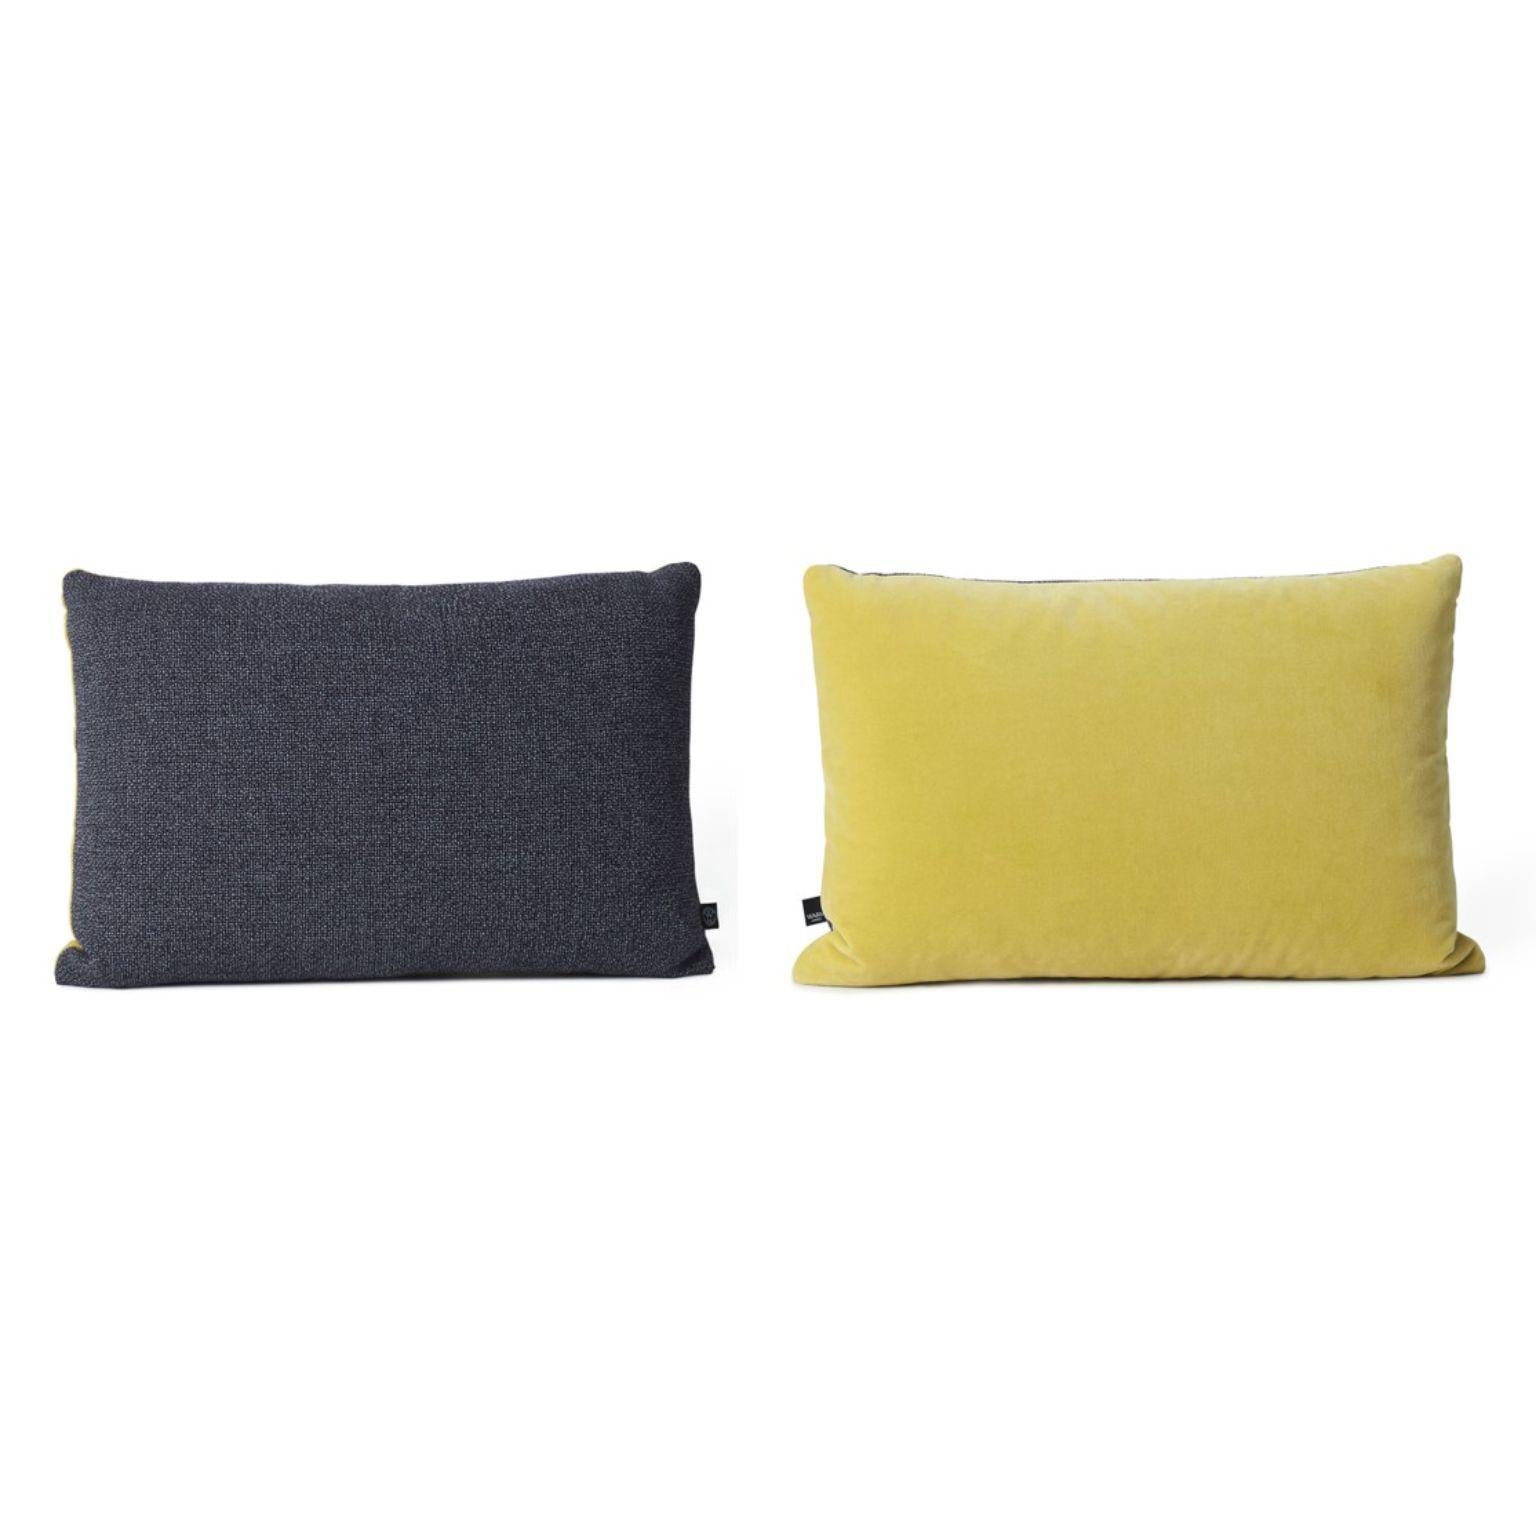 Set of 2 rectangular cushions by Warm Nordic
Dimensions: D60 x W40 cm
Material: New wool, Cotton, Feathers
Weight: 1.2 kg 
Also available in different variations. 

Exclusive cushion in two different Kvadrat top quality fabrics. The Moodify